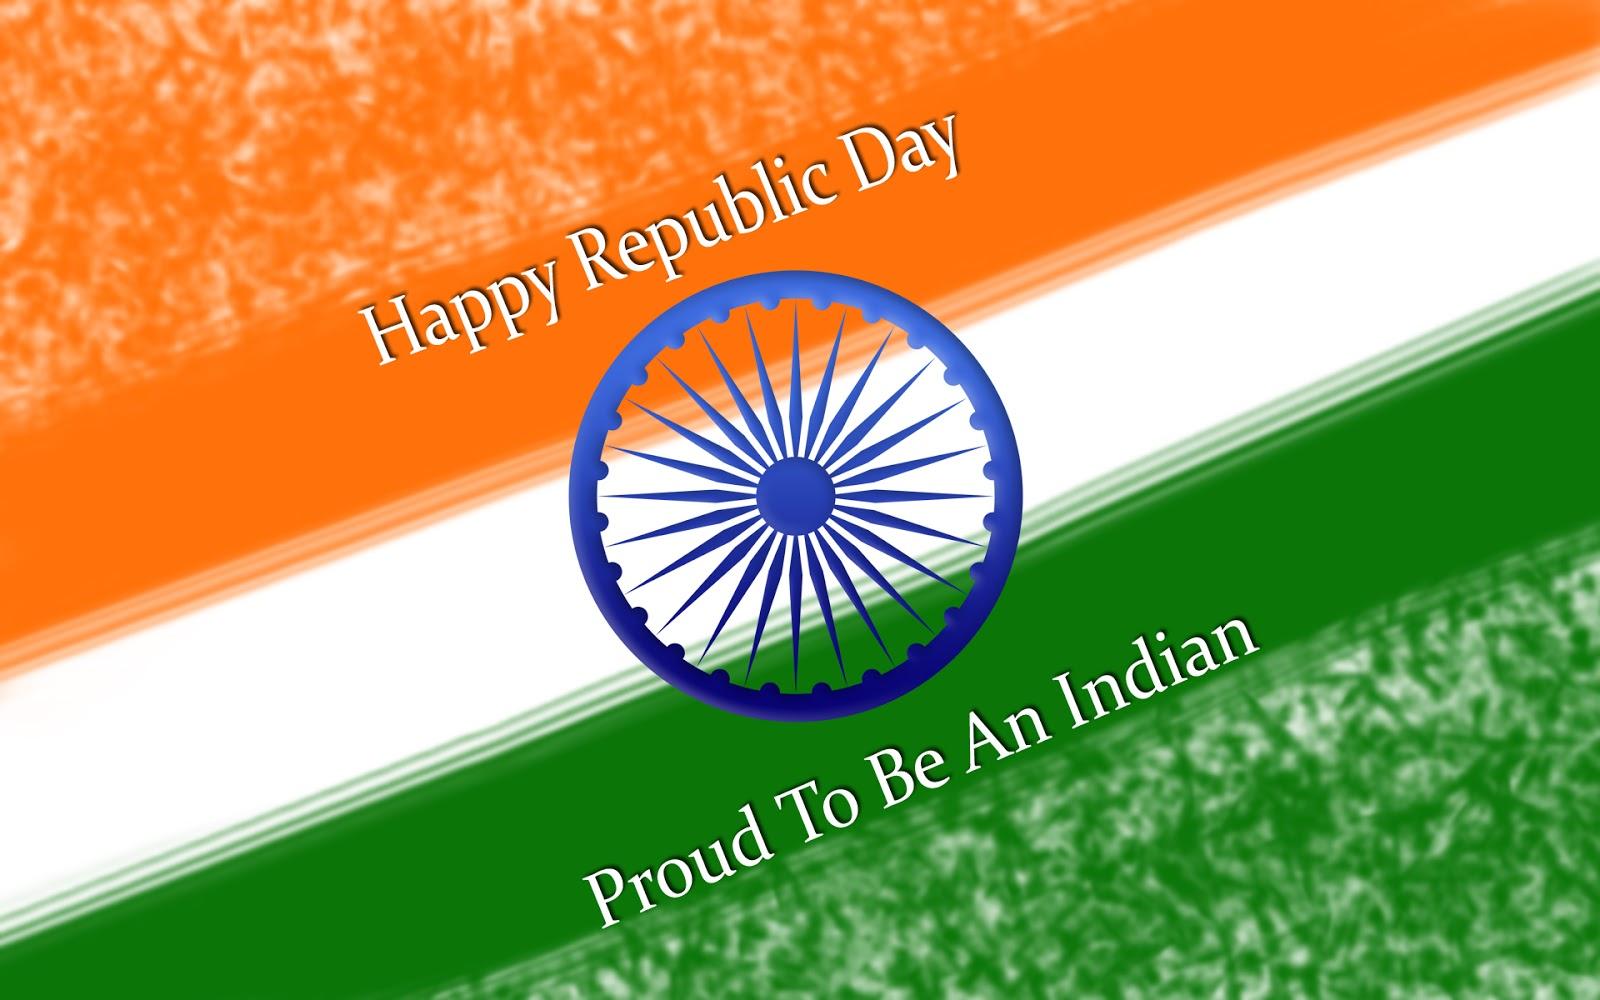 Happy Republic Day Image, Photo, Wallpaper, Songs, Wishes